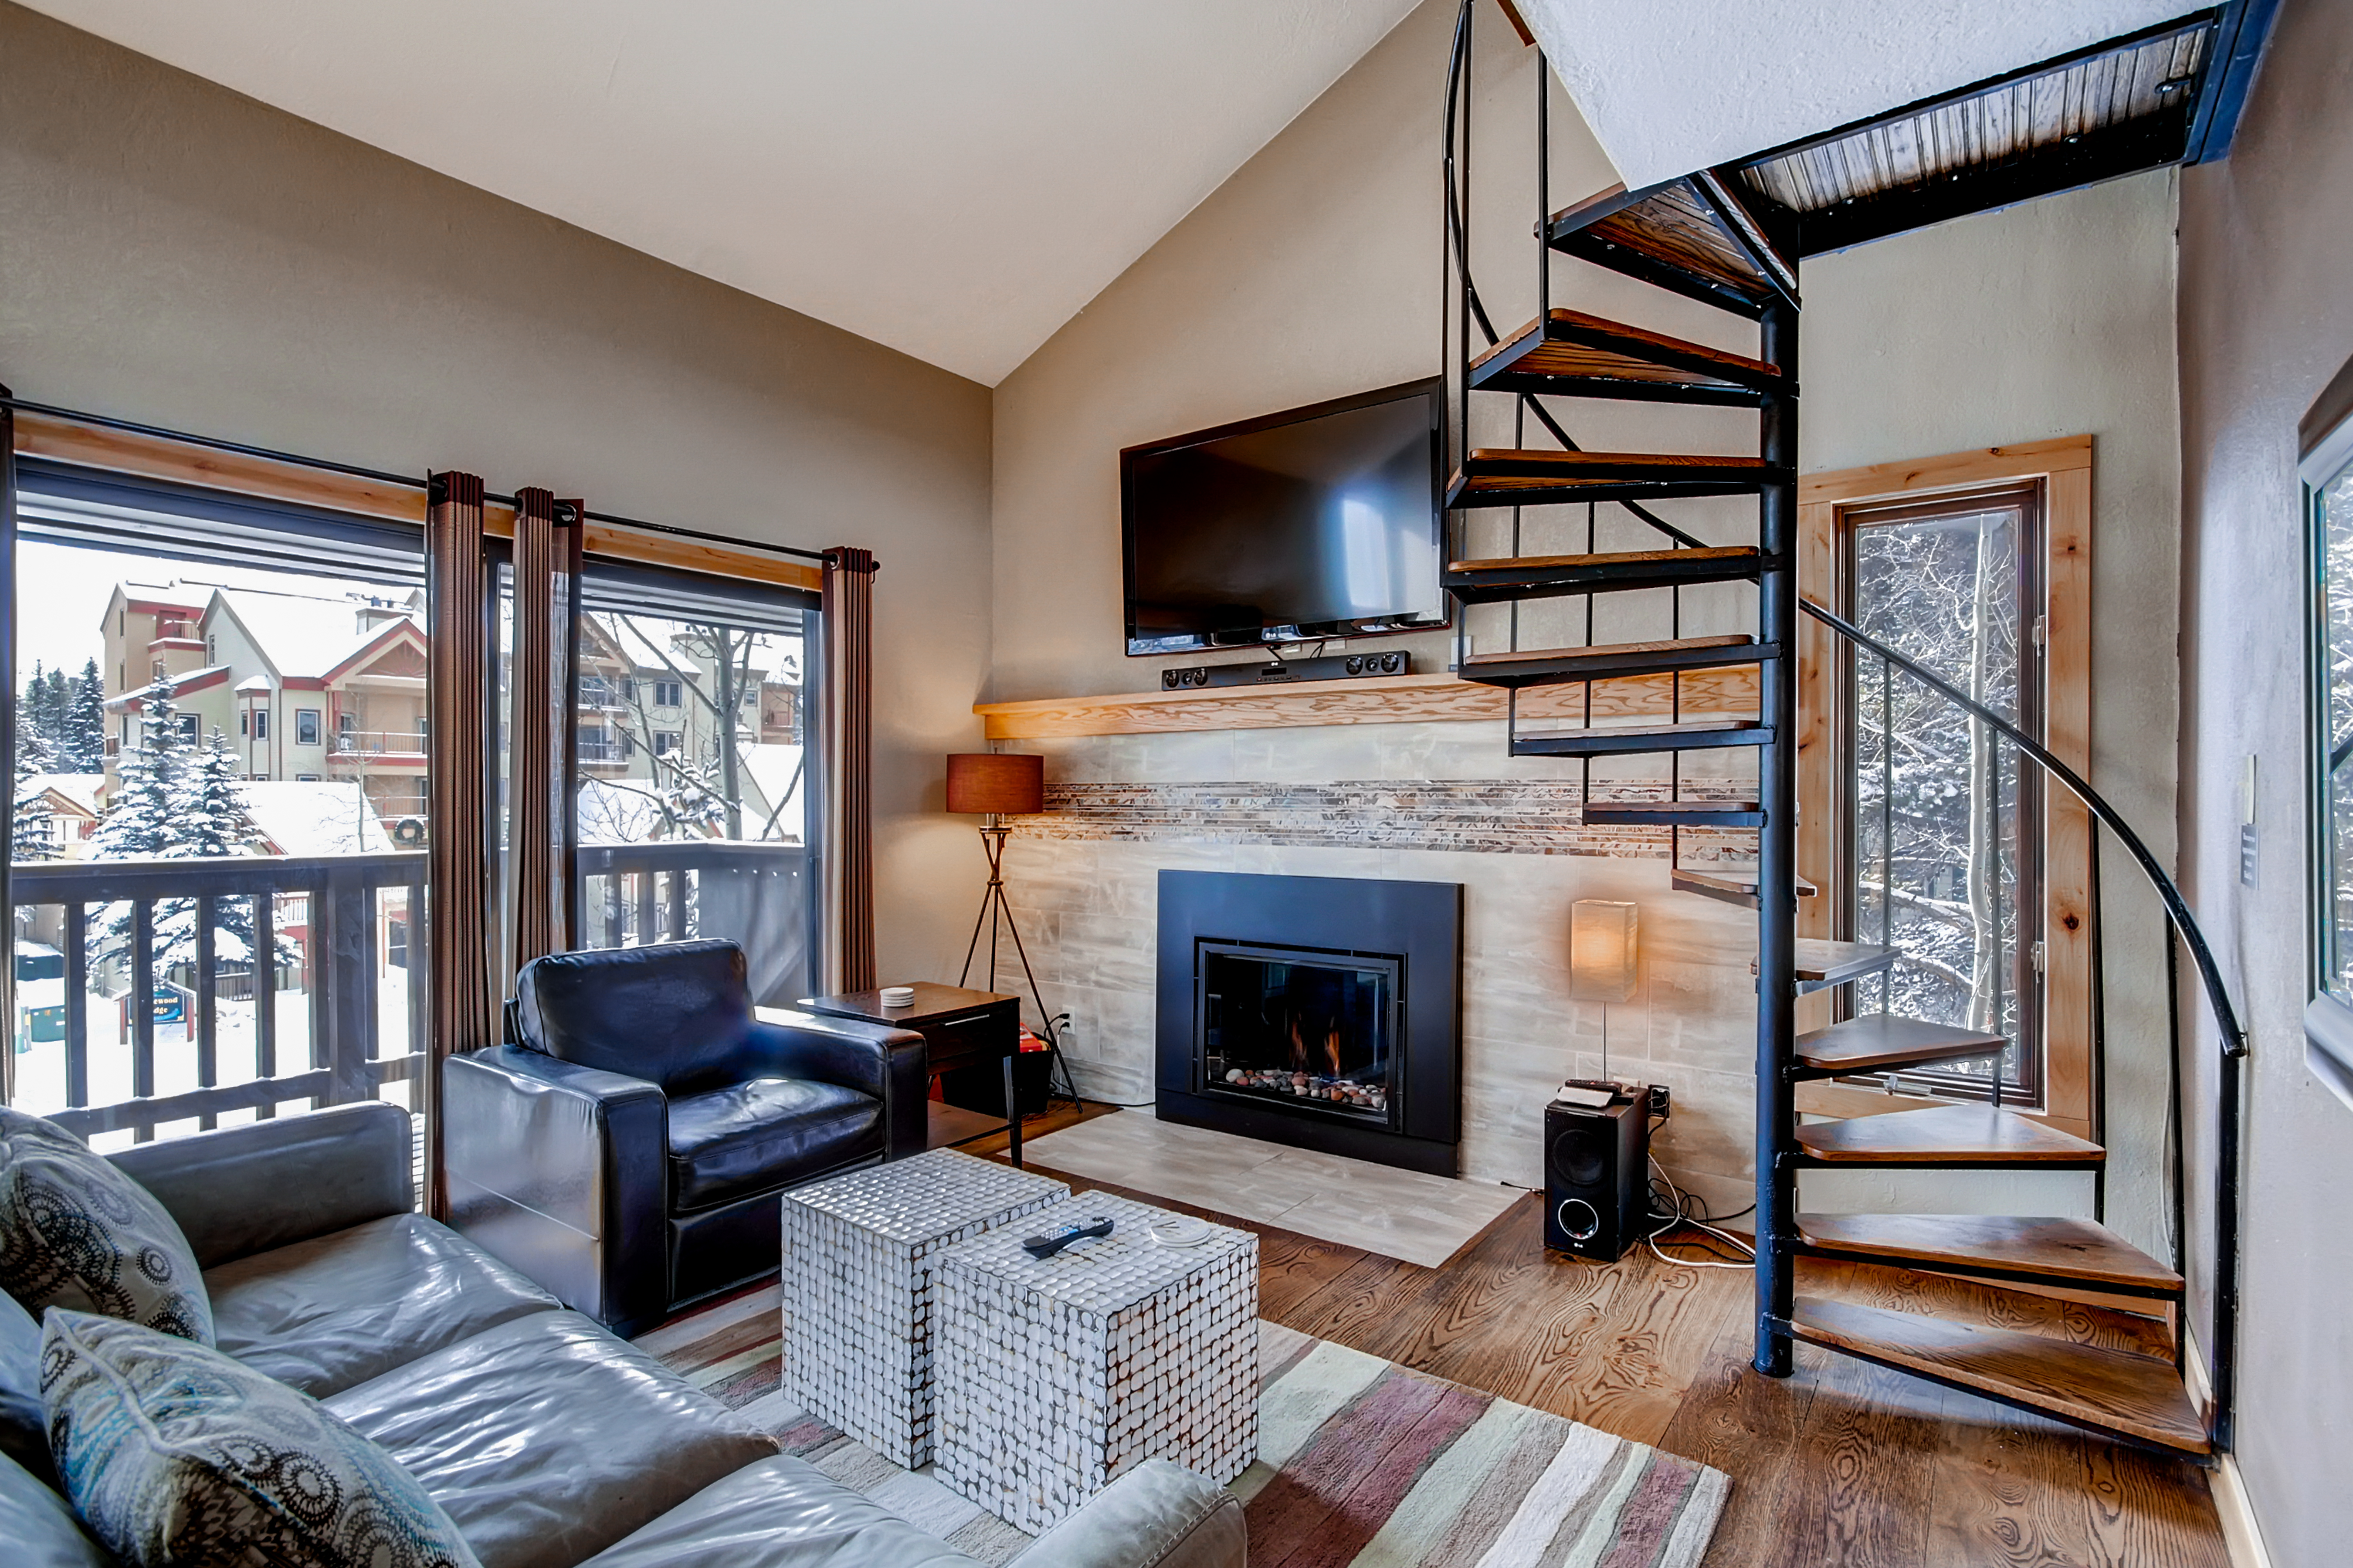 Relax by the gas fireplace in the cozy living room - 4 O’Clock Lodge A16 Breckenridge Vacation Rental